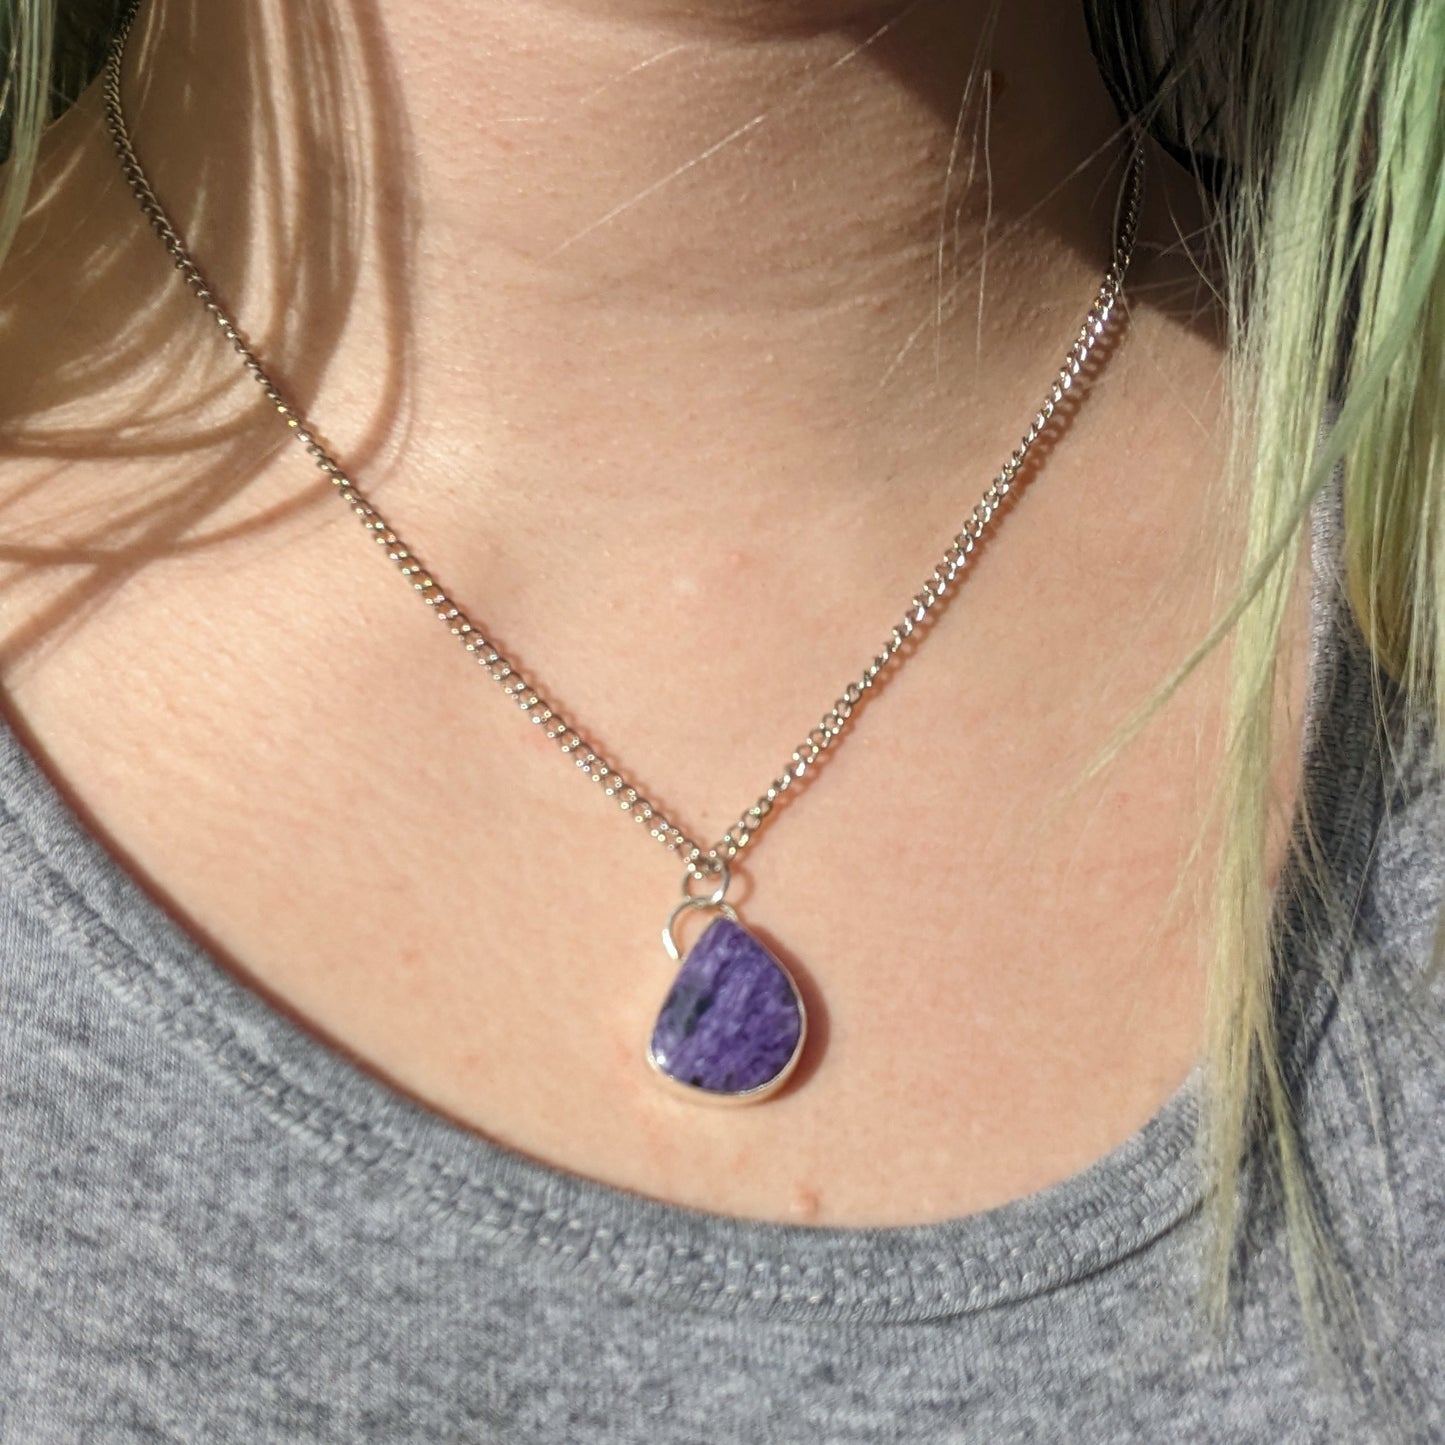 Aras models the purple charoite necklace to show how it hangs similarly to a teardrop pendant but off center due to the asymmetrical nature of the stone.